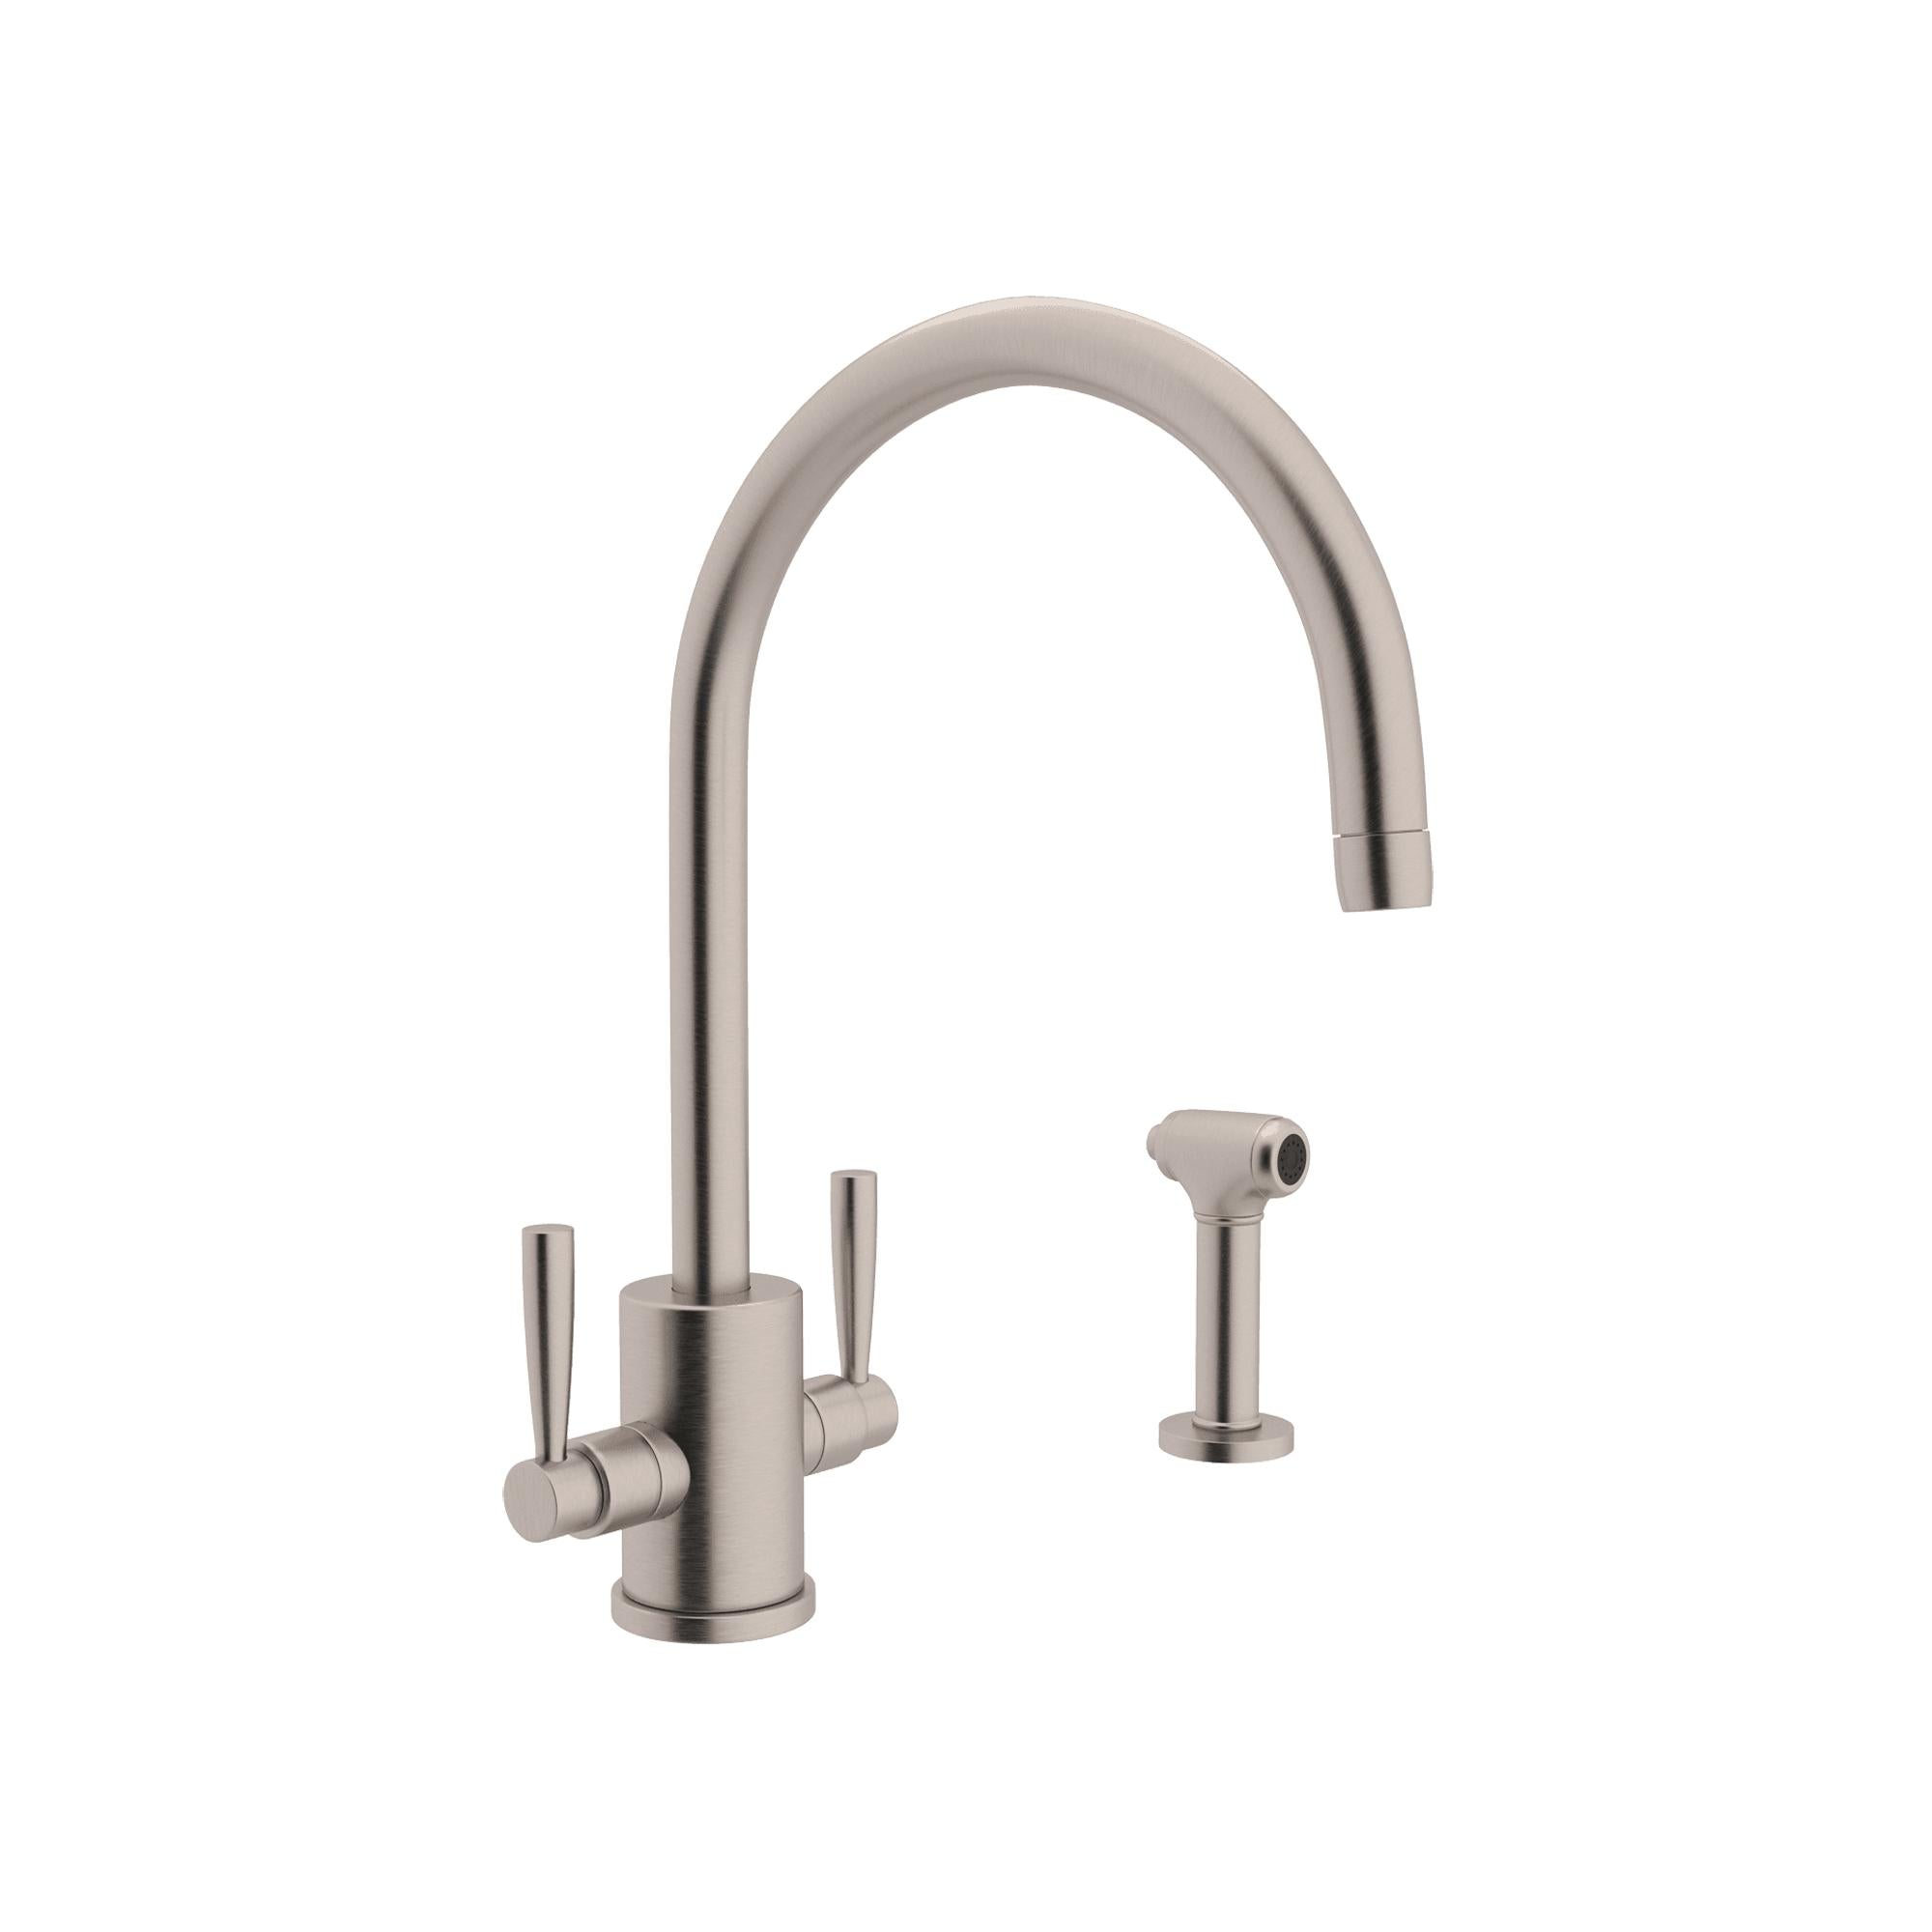 Perrin & Rowe U.4312 Holborn Two Handle Kitchen Faucet With C-Spout and Side Spray